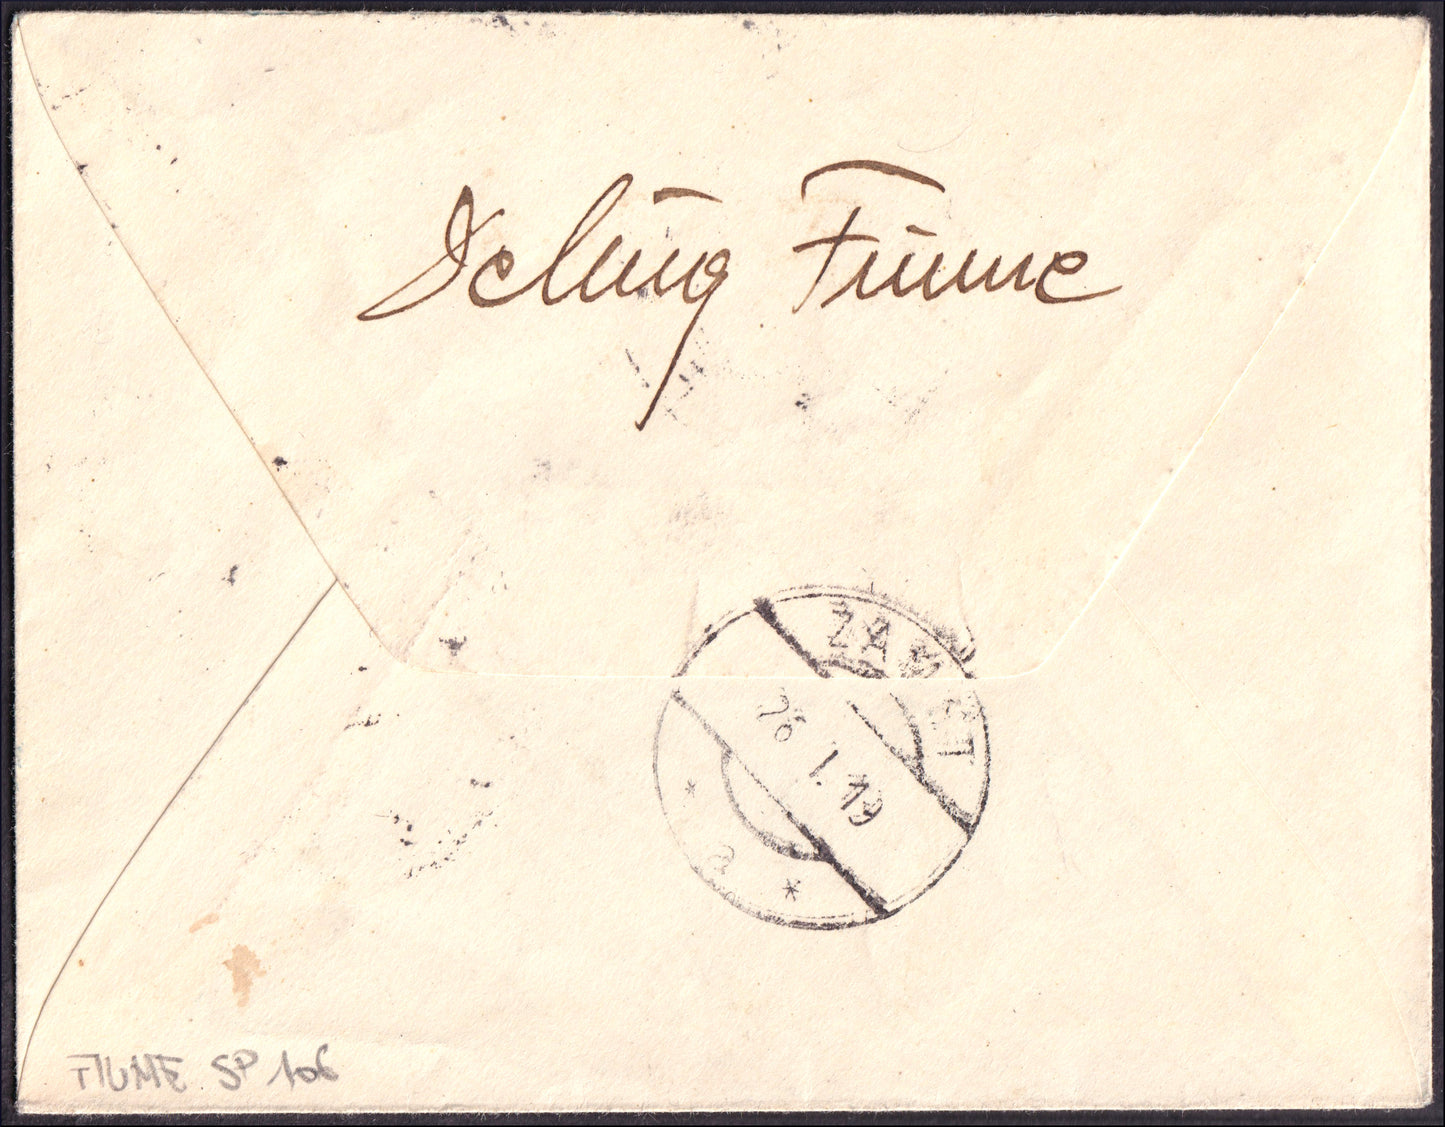 FiumeSP106 - 1918 - Letter stamped with postage due from Hungary 20 fillers with FIUME machine overprint and further "Franco 45" overprint by hand (30)